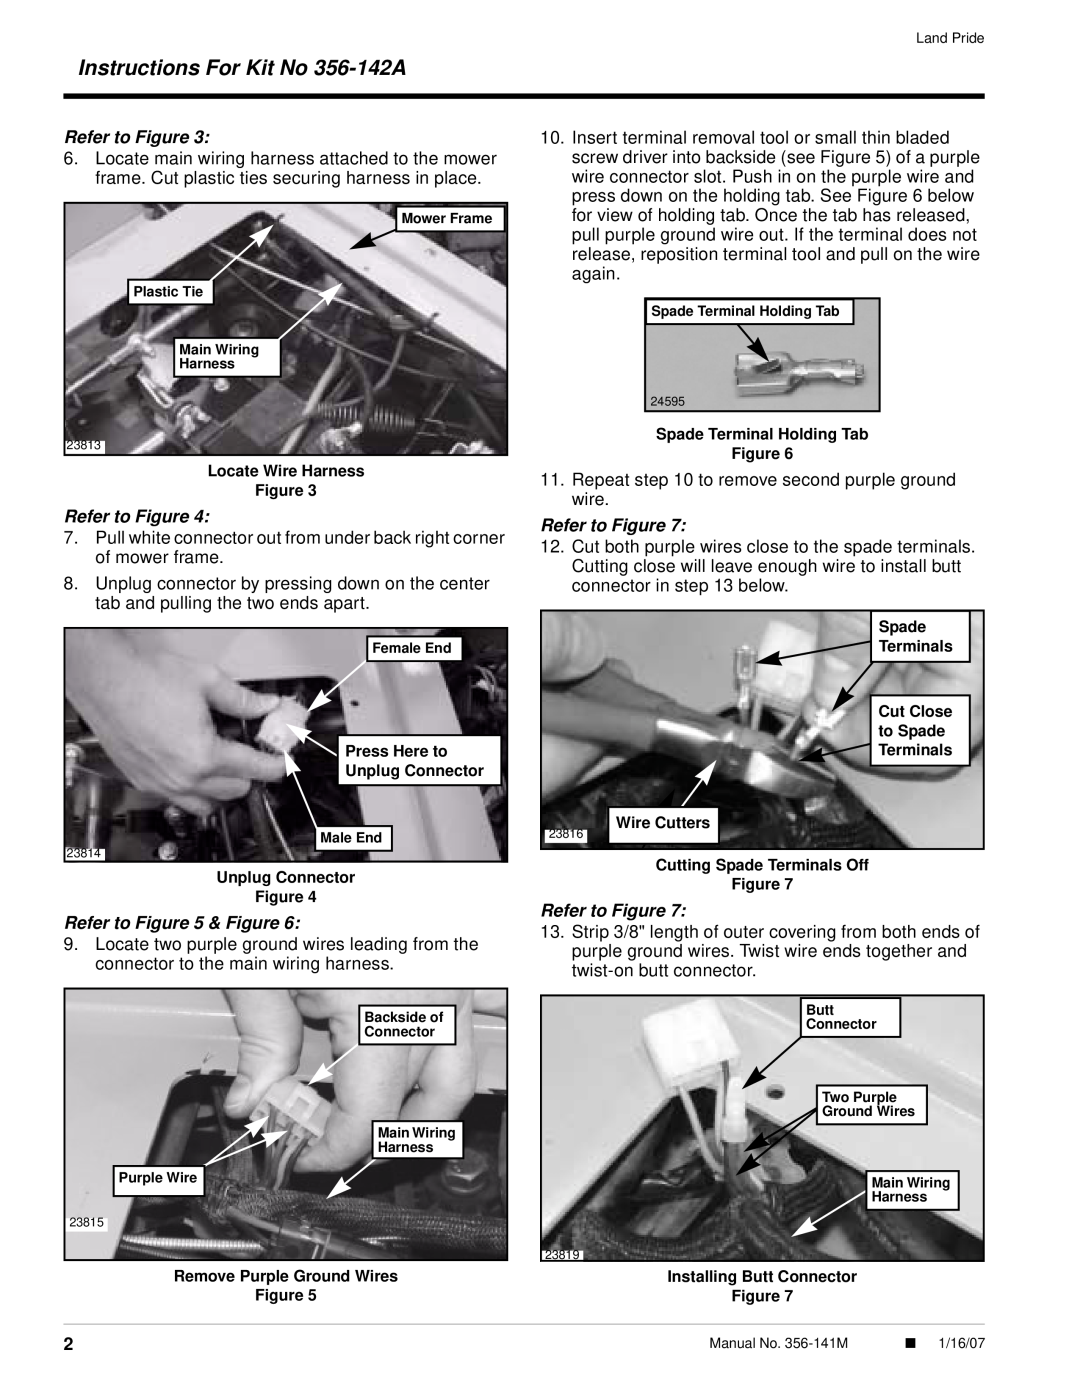 Land Pride manual Instructions For Kit No 356-142A, Refer to & Figure, Refer to Figure 